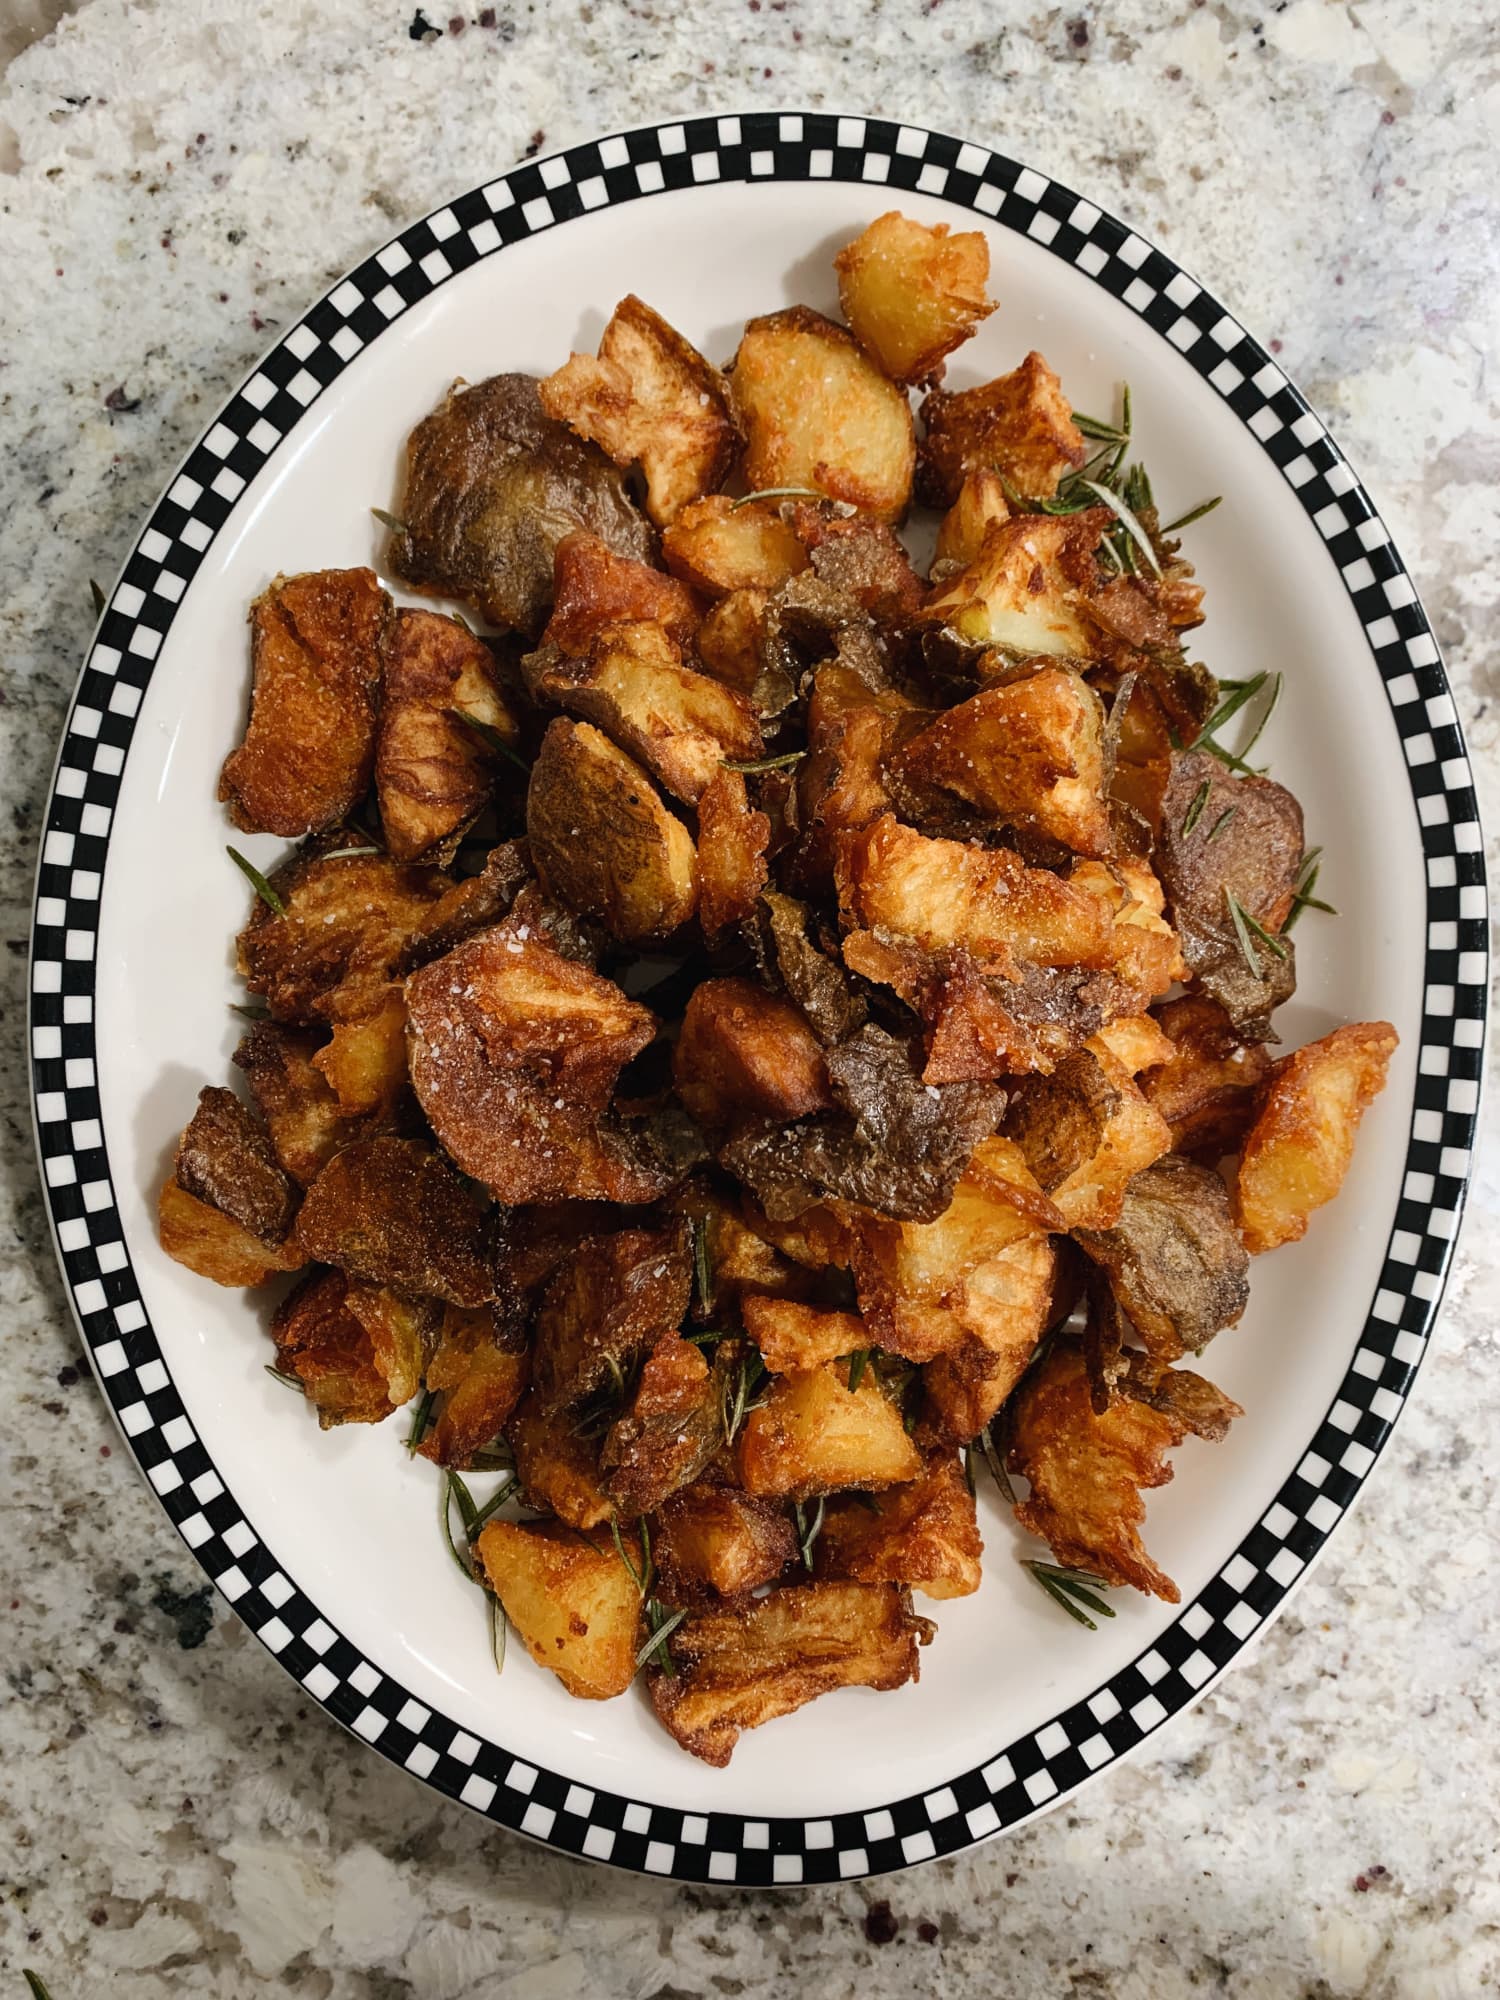 Smitten Kitchen’s Crispy Crumbled Potatoes Are the Deep-Fried Gift We All Need This Year